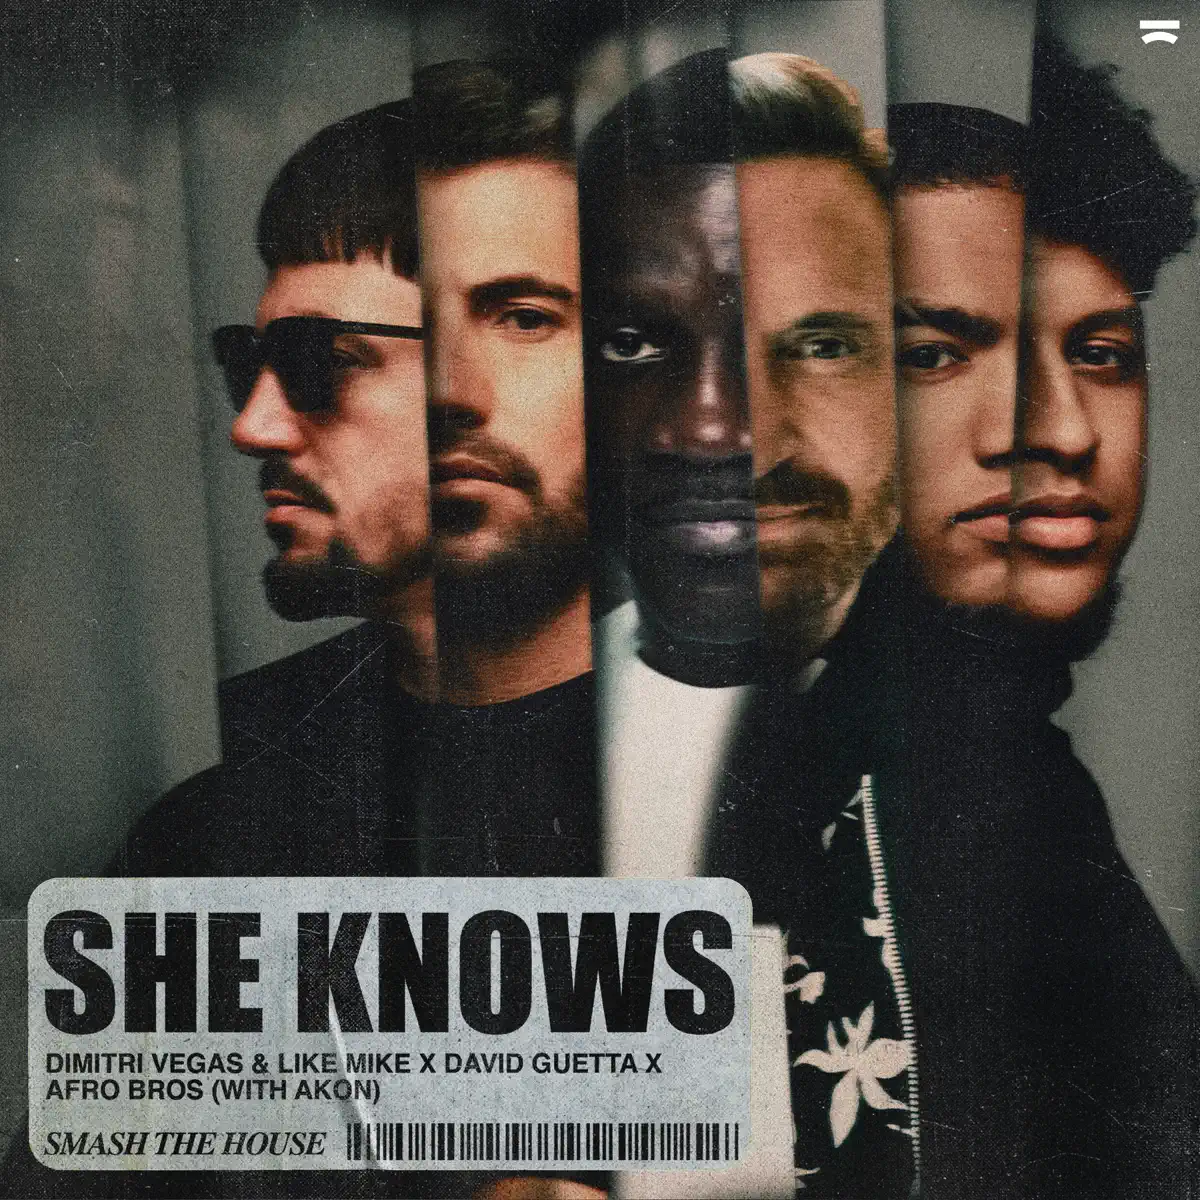 Dimitri Vegas & Like Mike, David Guetta & Afro Bros - She Knows (With Akon) - Single (2023) [iTunes Plus AAC M4A]-新房子